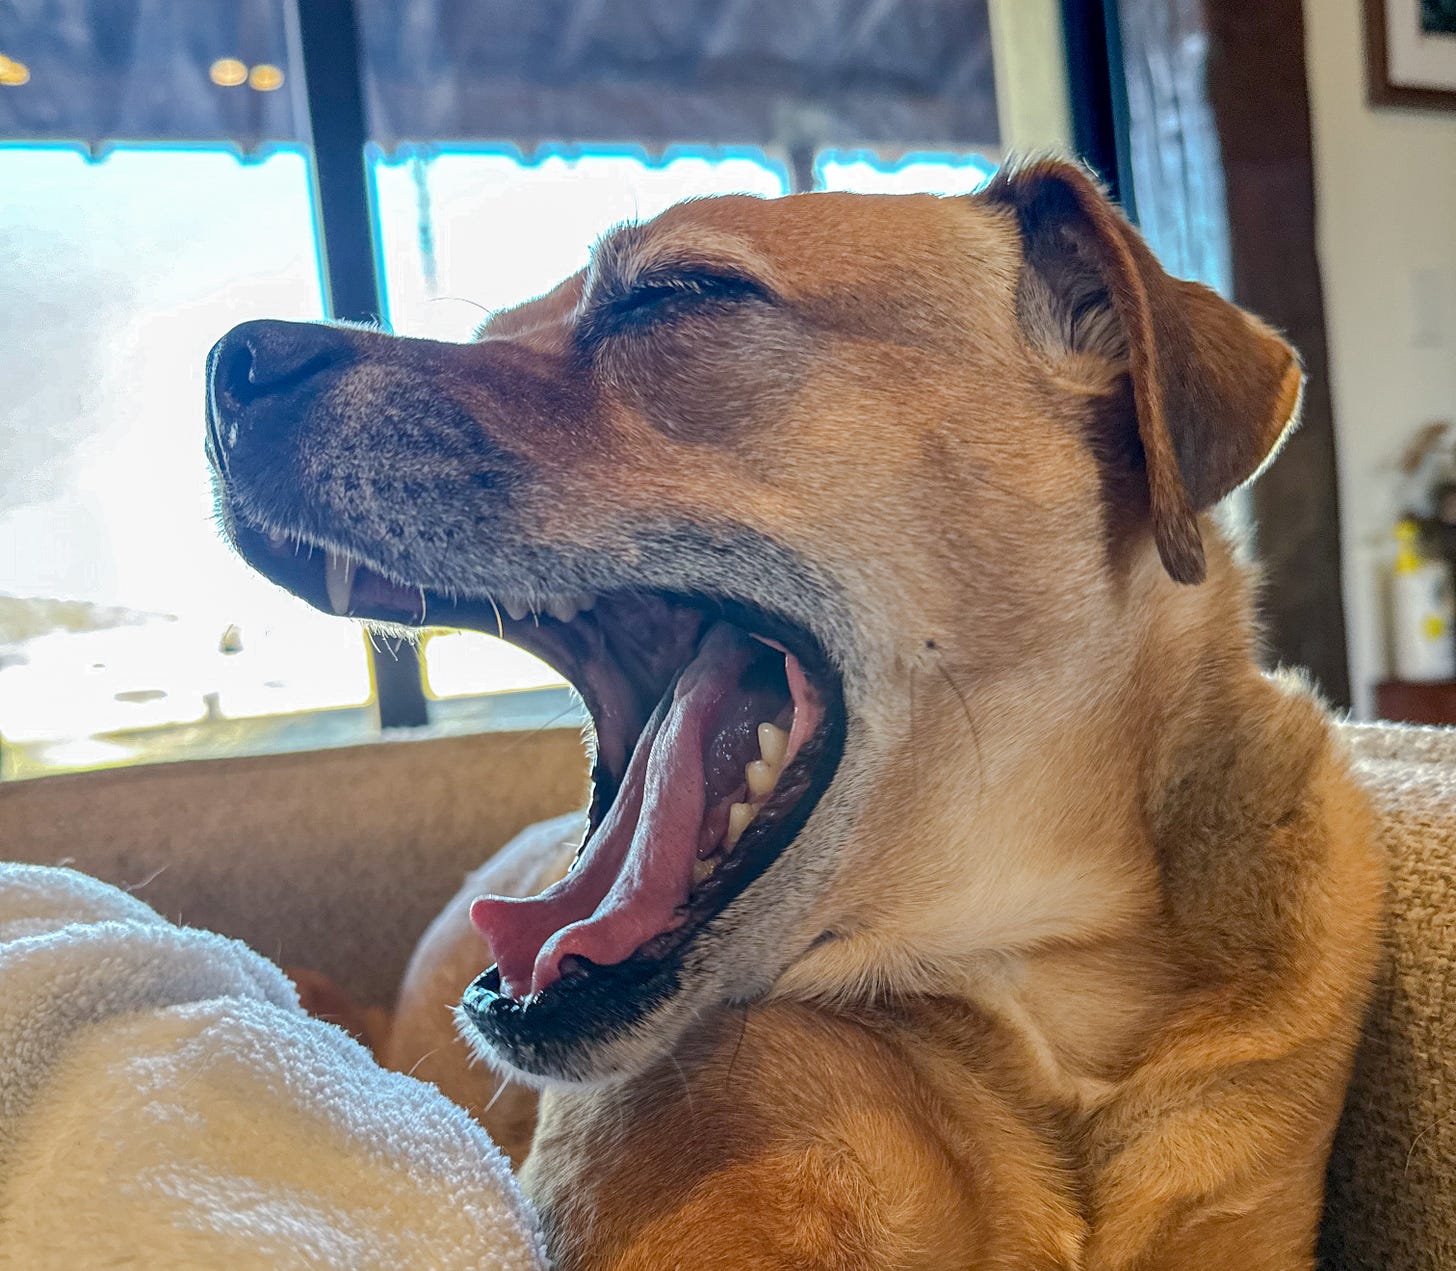 A brown dog yawns so widely that it looks like he is yelling.